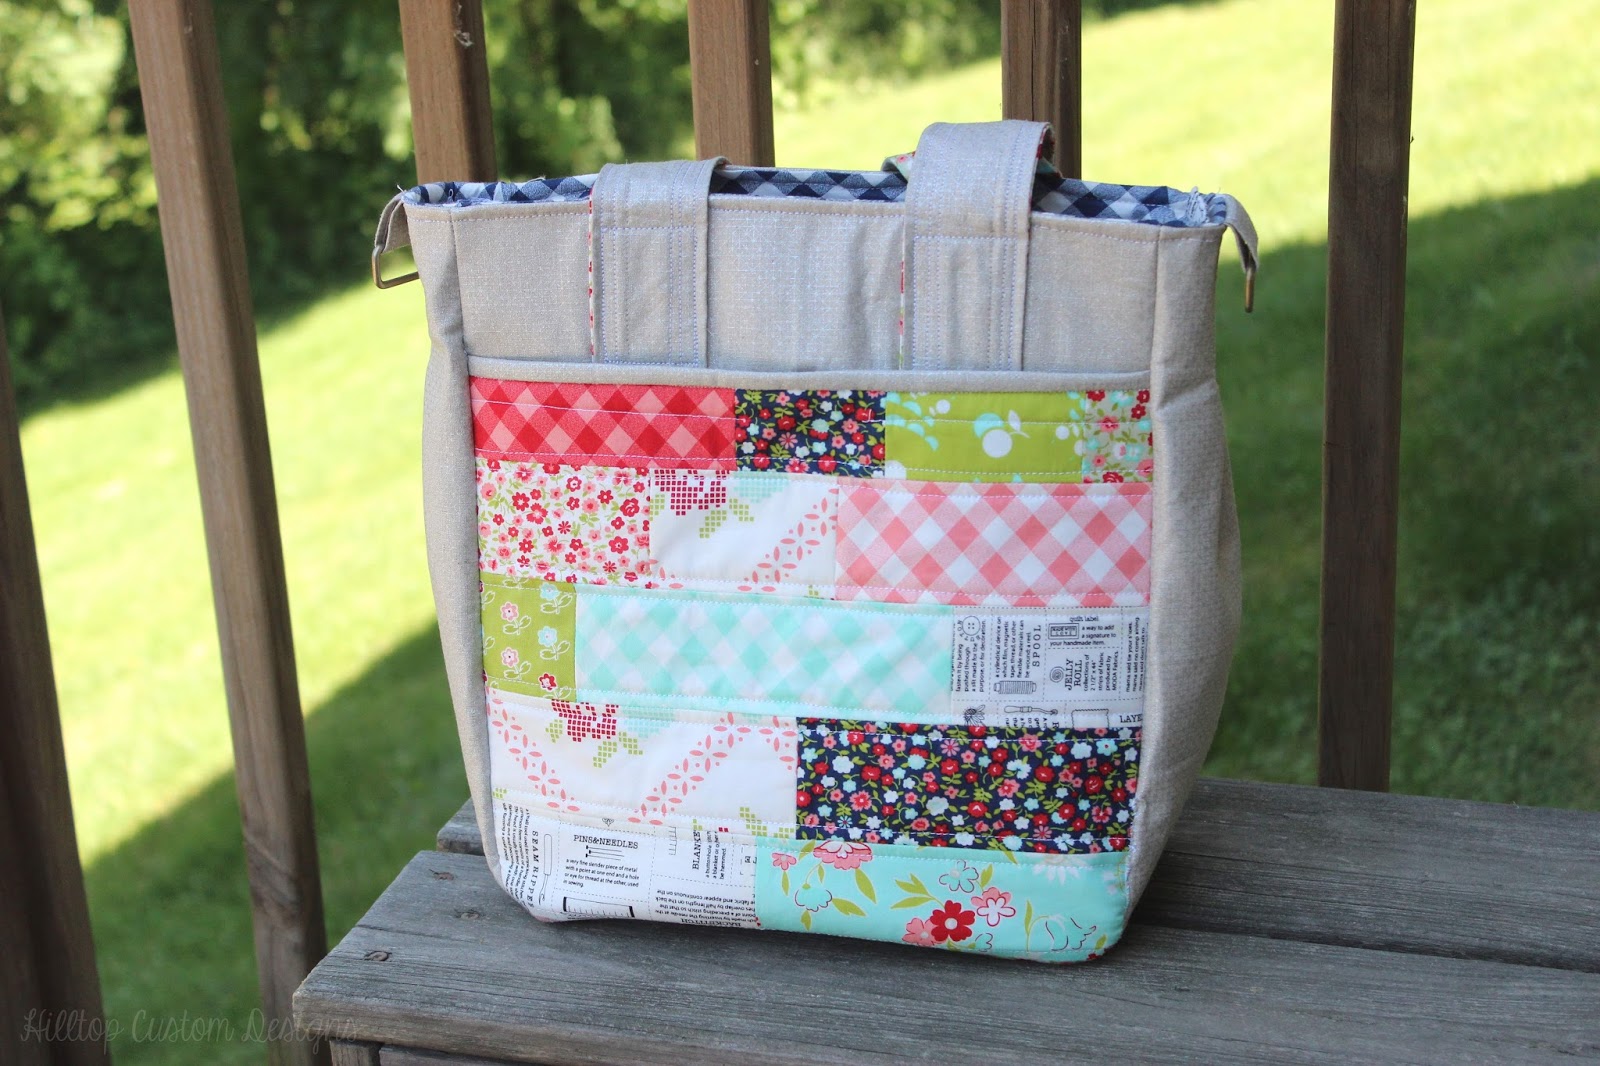 Super Tote Pattern – Noodlehead Sewing Patterns